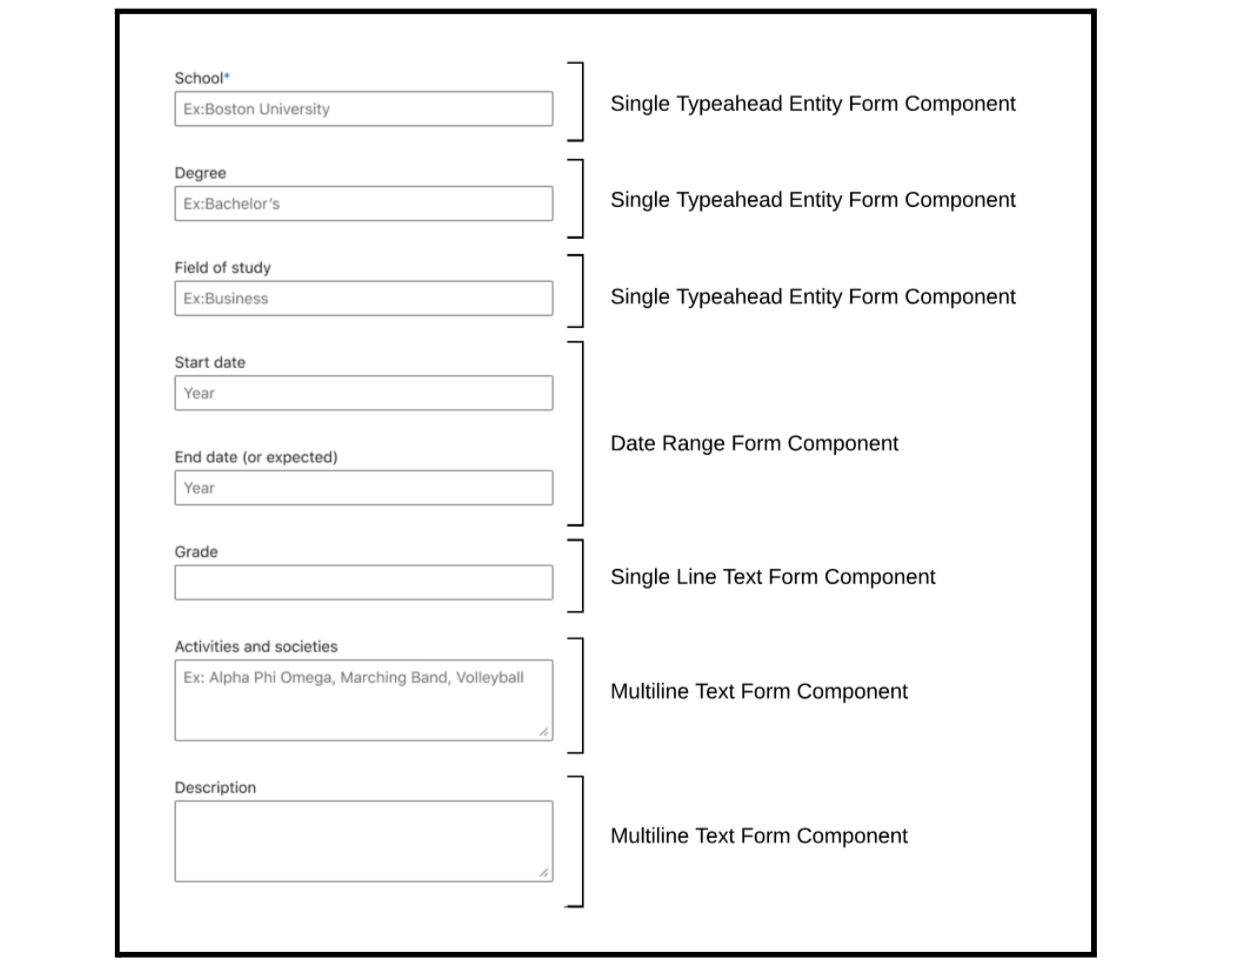 form-component-mapping-to-form-input-fields